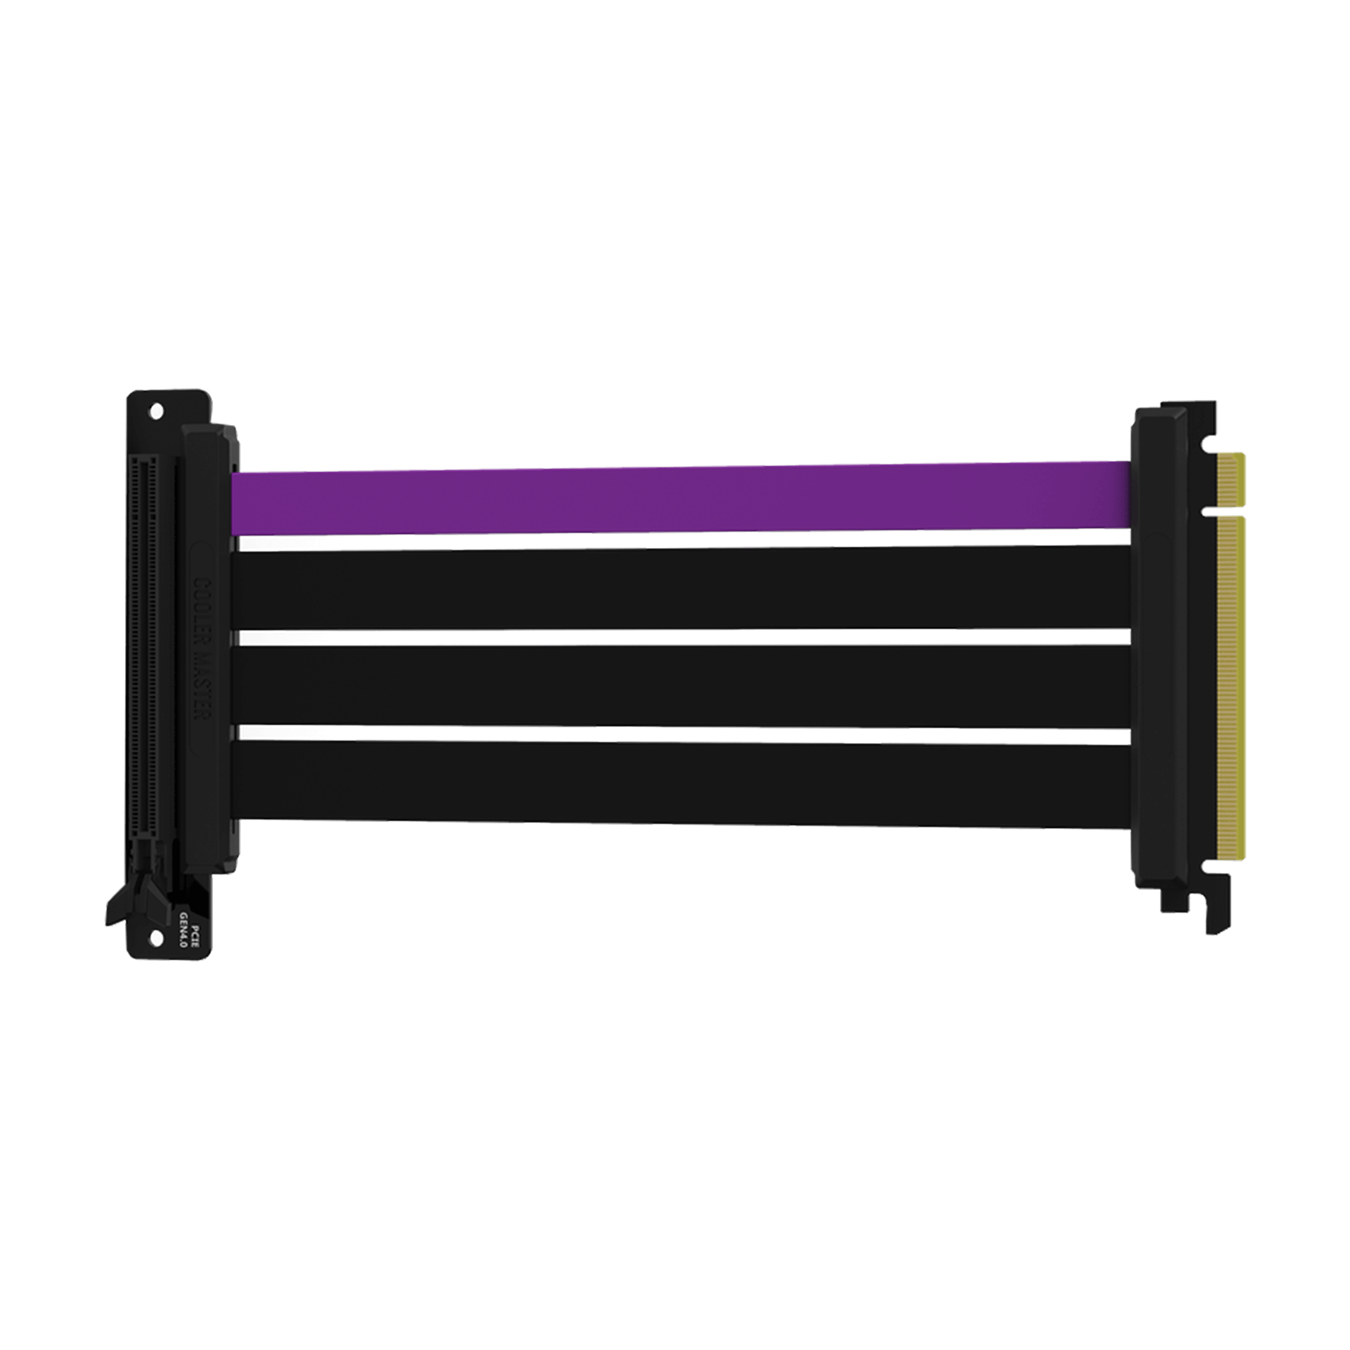 The Cooler Master MasterAccessory PCIe 4.0 Riser Cable with three matte black cables and a single purple accent cable in a horizontal position. 